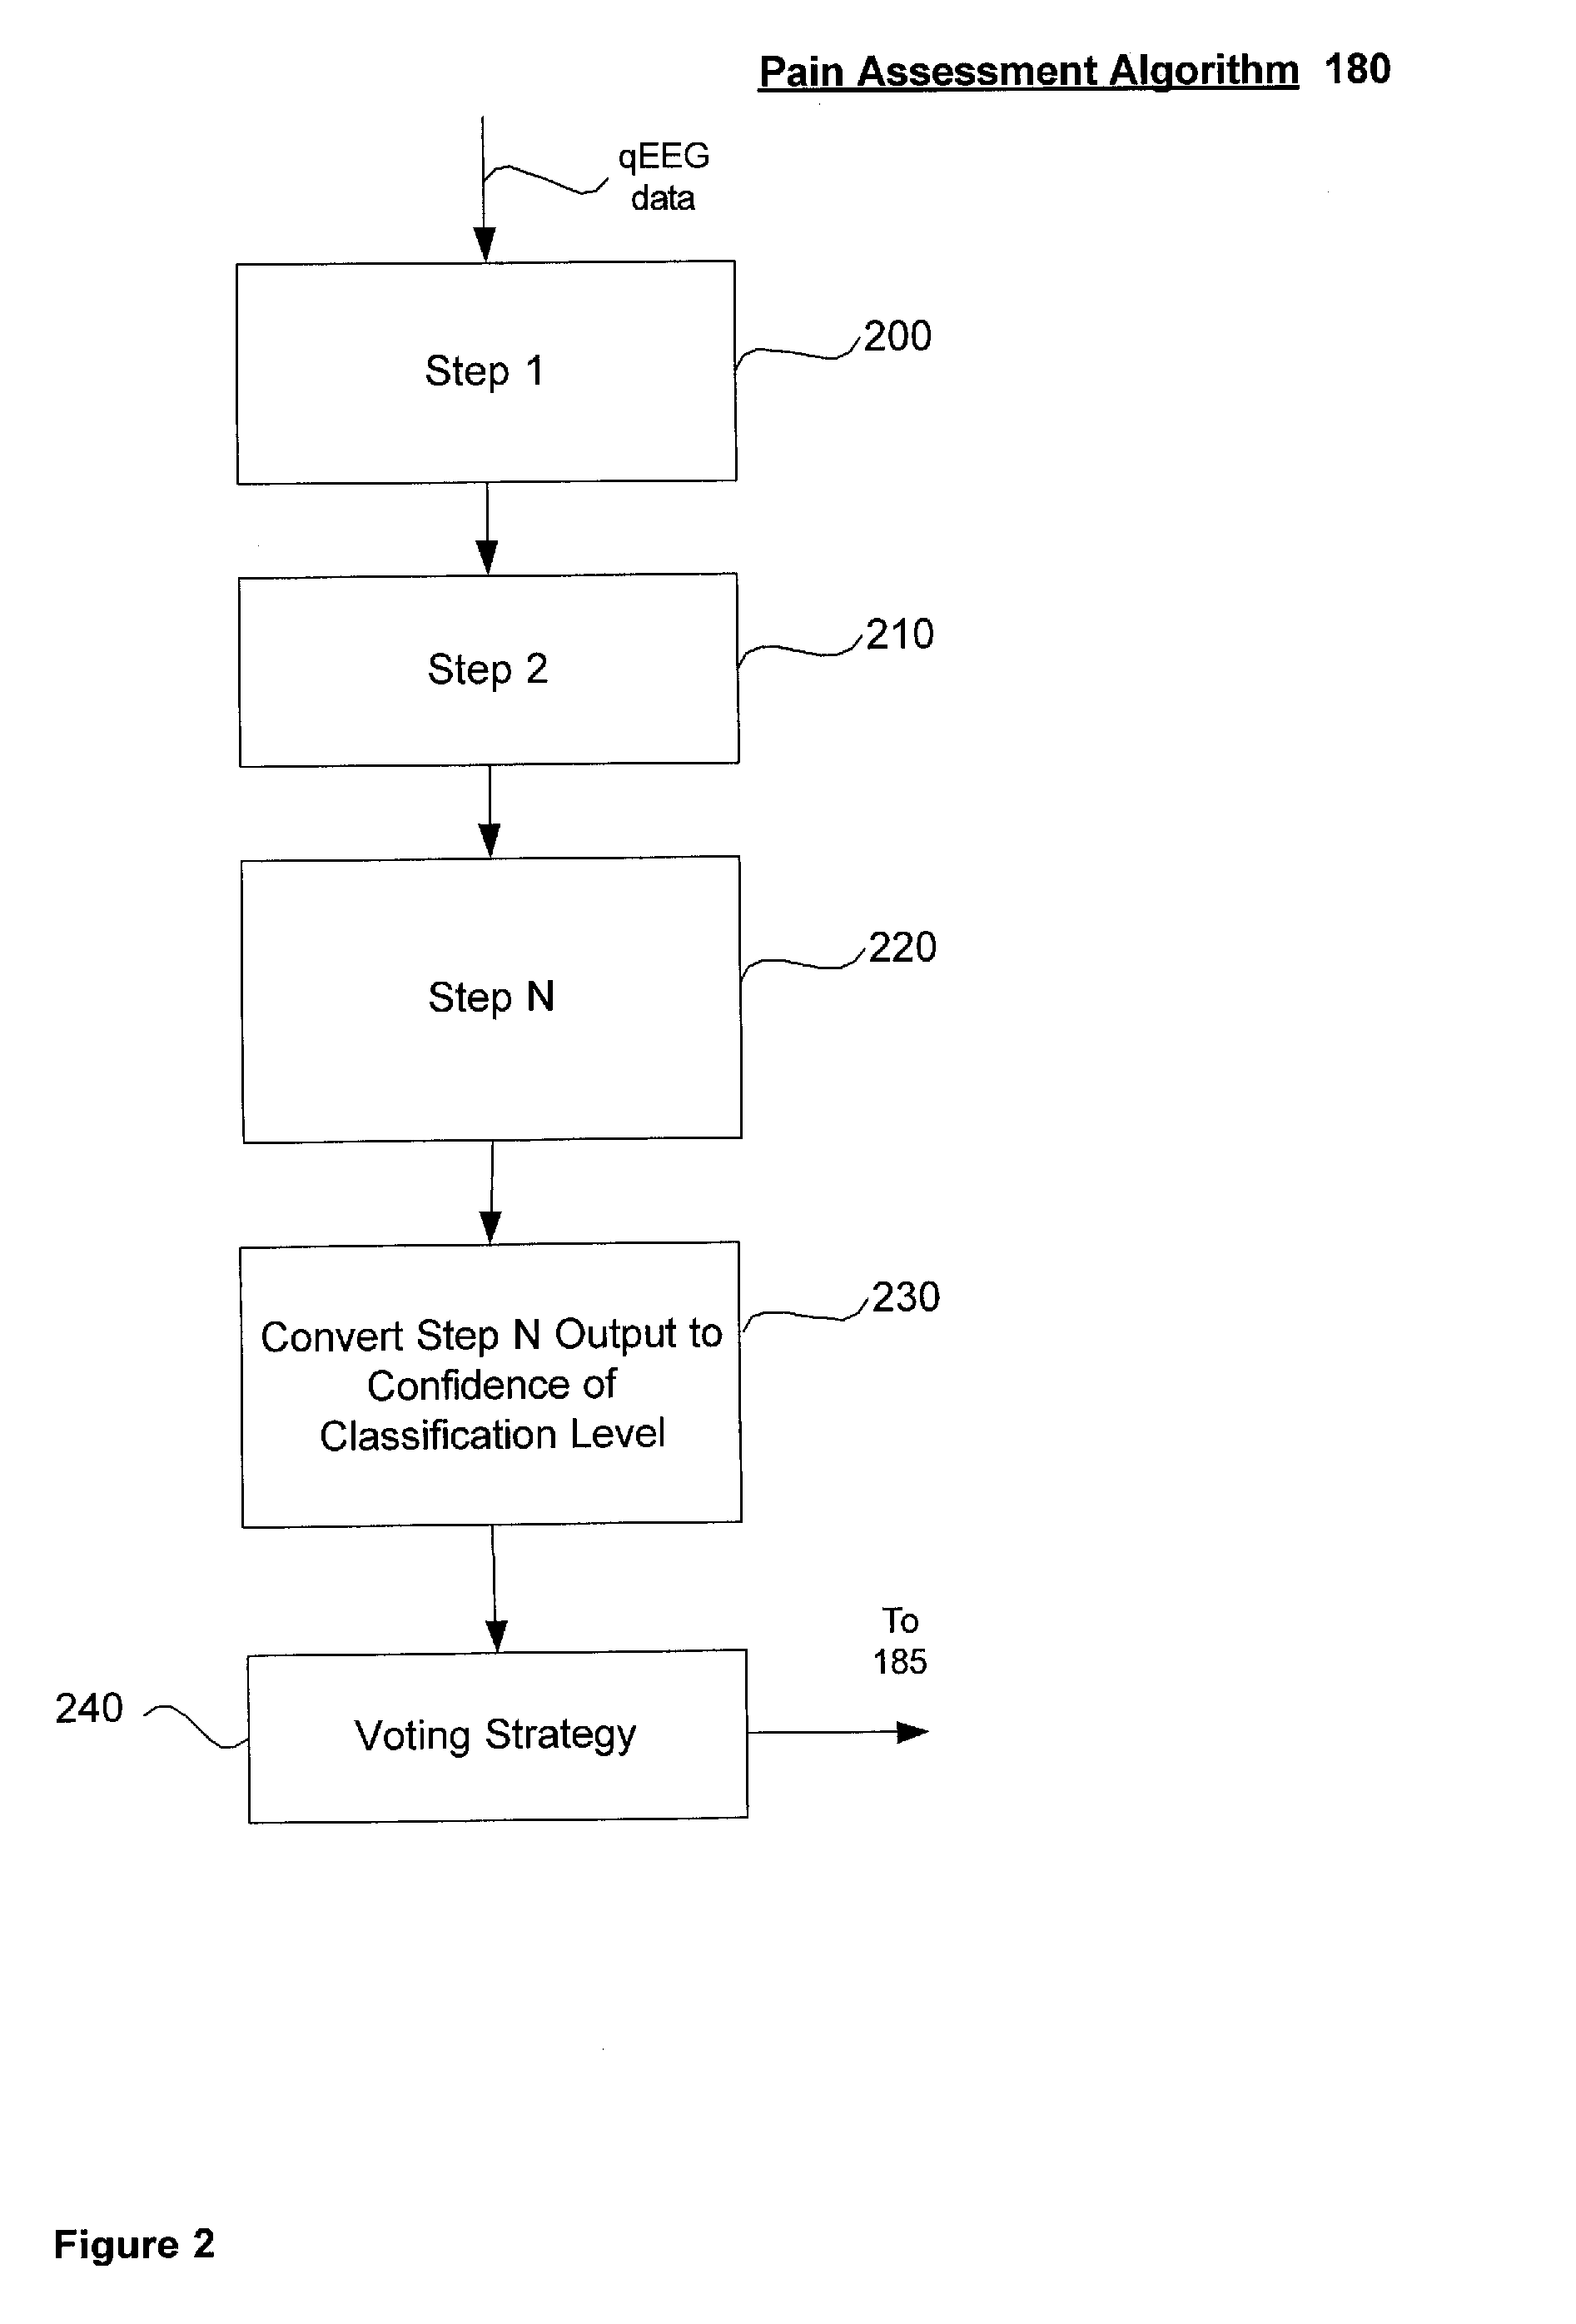 System and Method for Pain Detection and Computation of a Pain Quantification Index